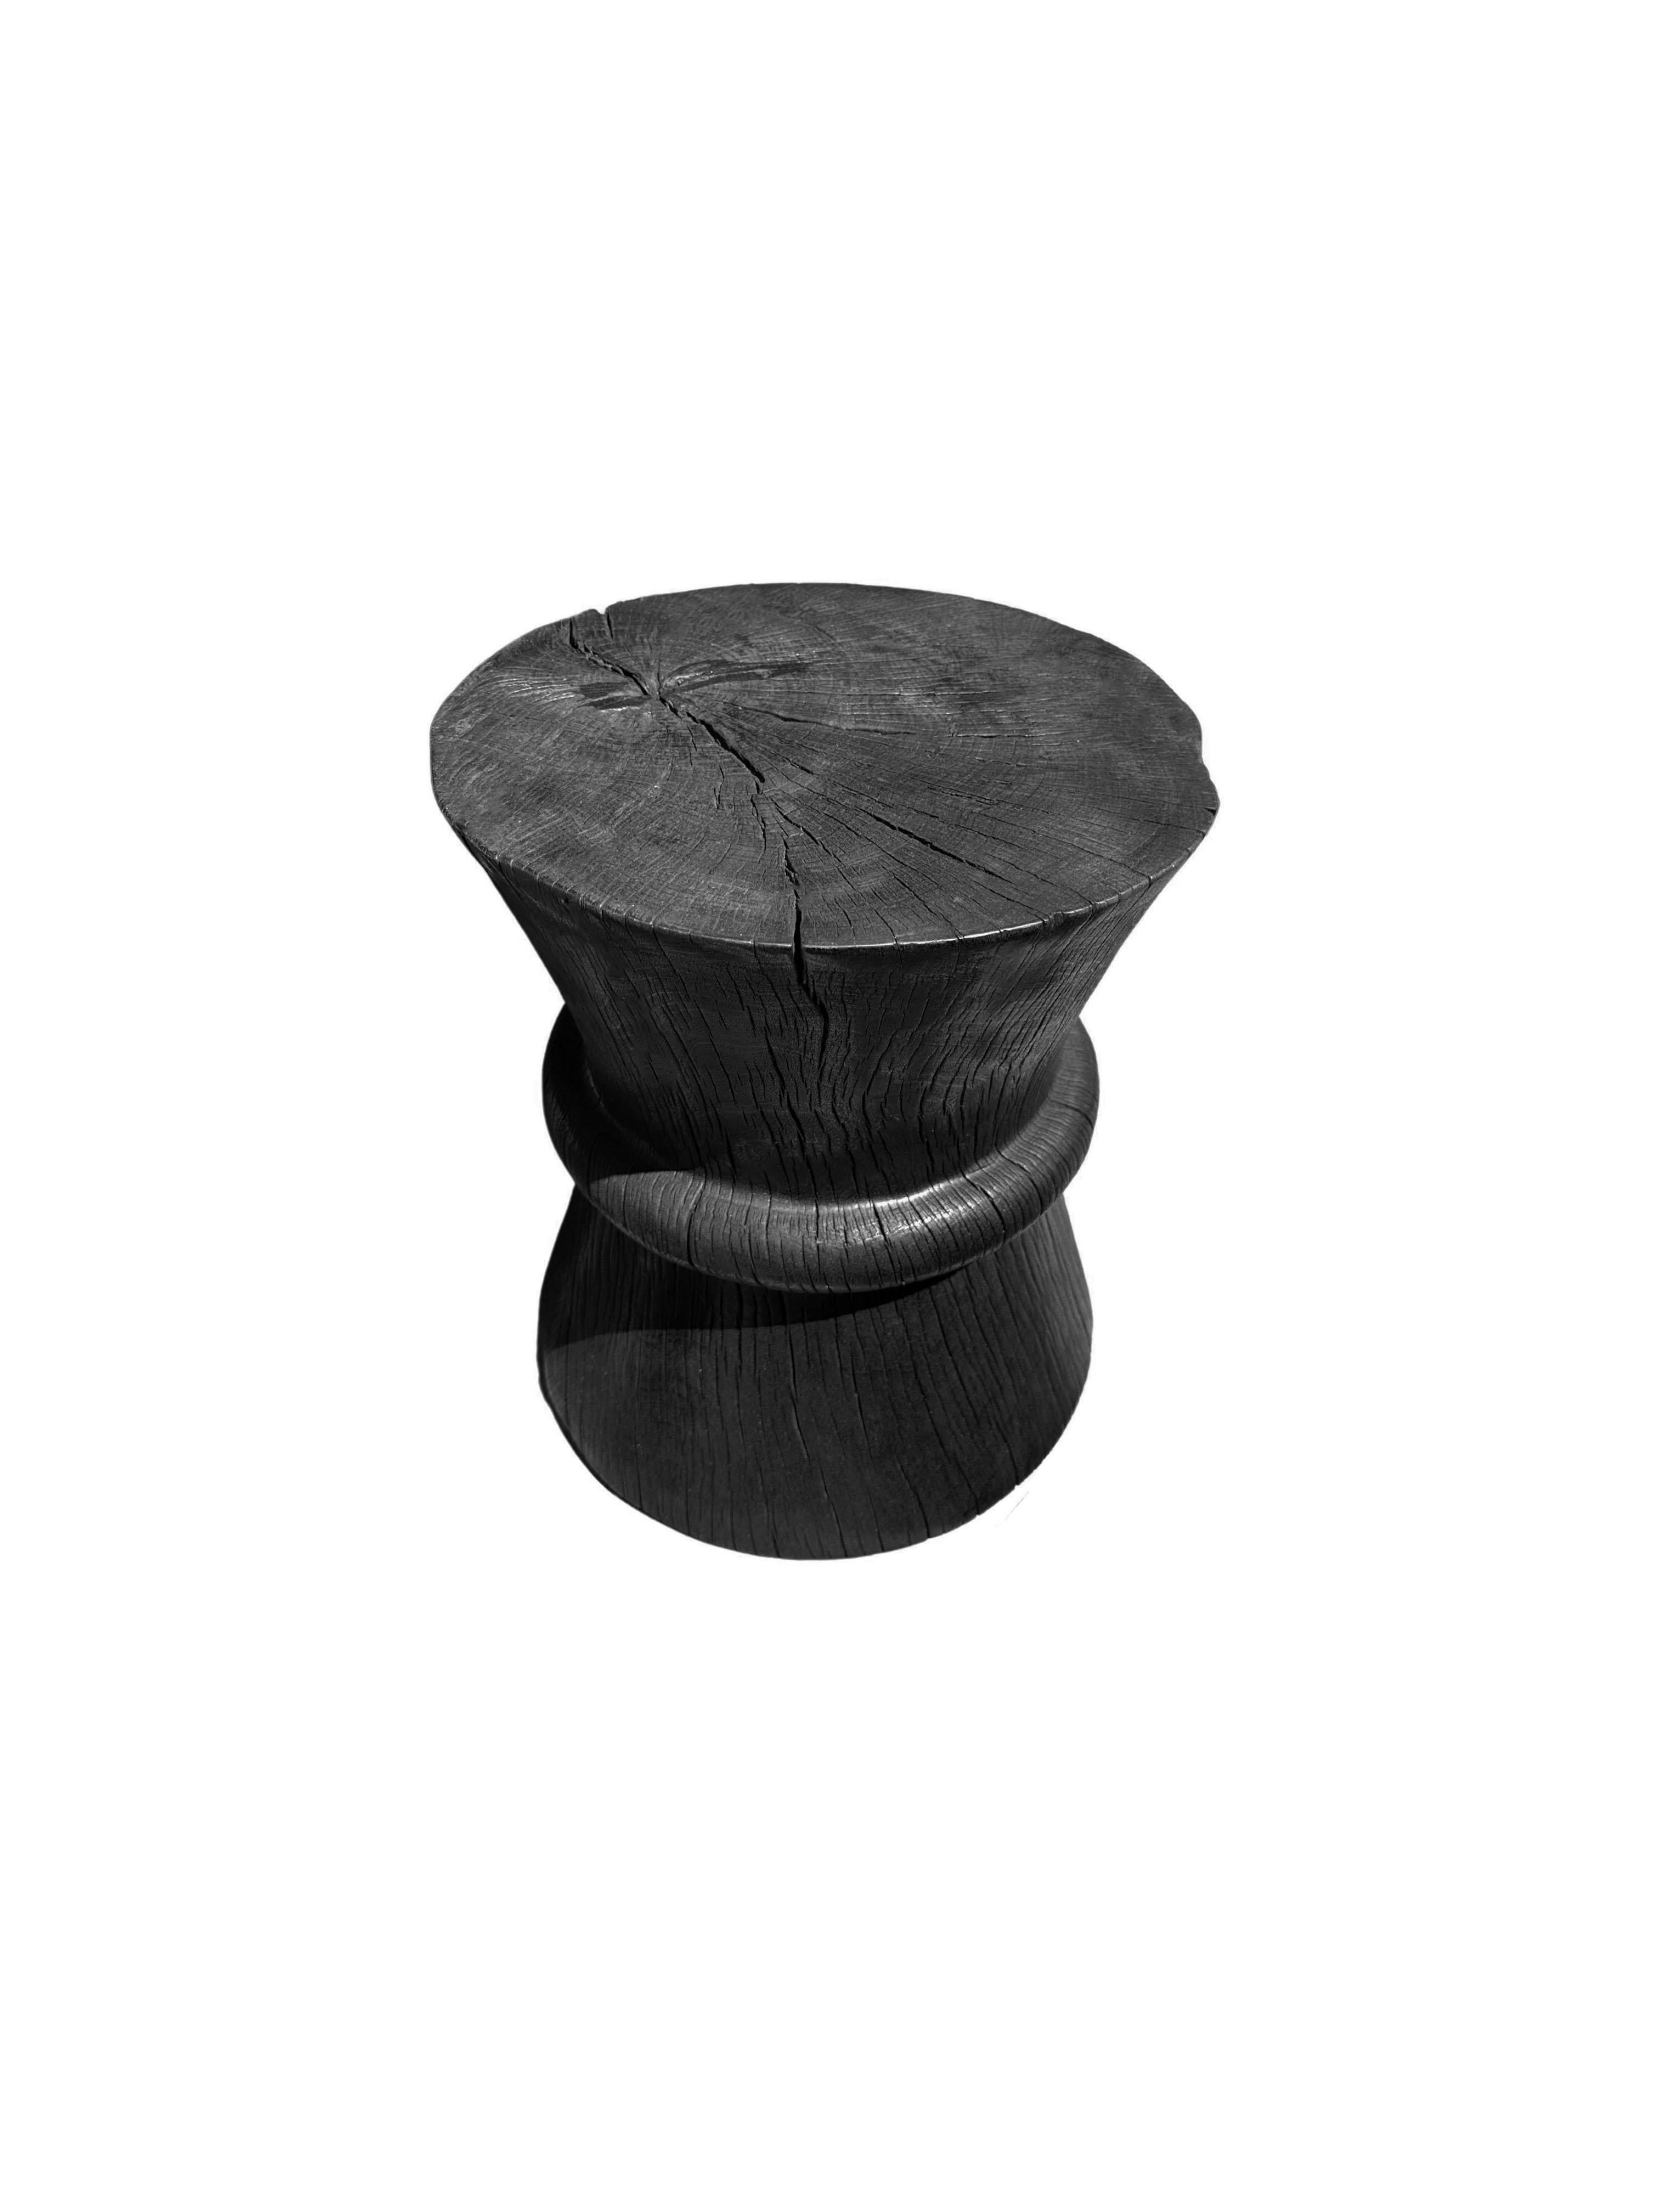 A wonderfully sculptural round side table. Its black pigment was achieved through a burning process creating both a wonderful color and effect. Its neutral pigment and wood texture makes it perfect for any space. A uniquely sculptural and versatile